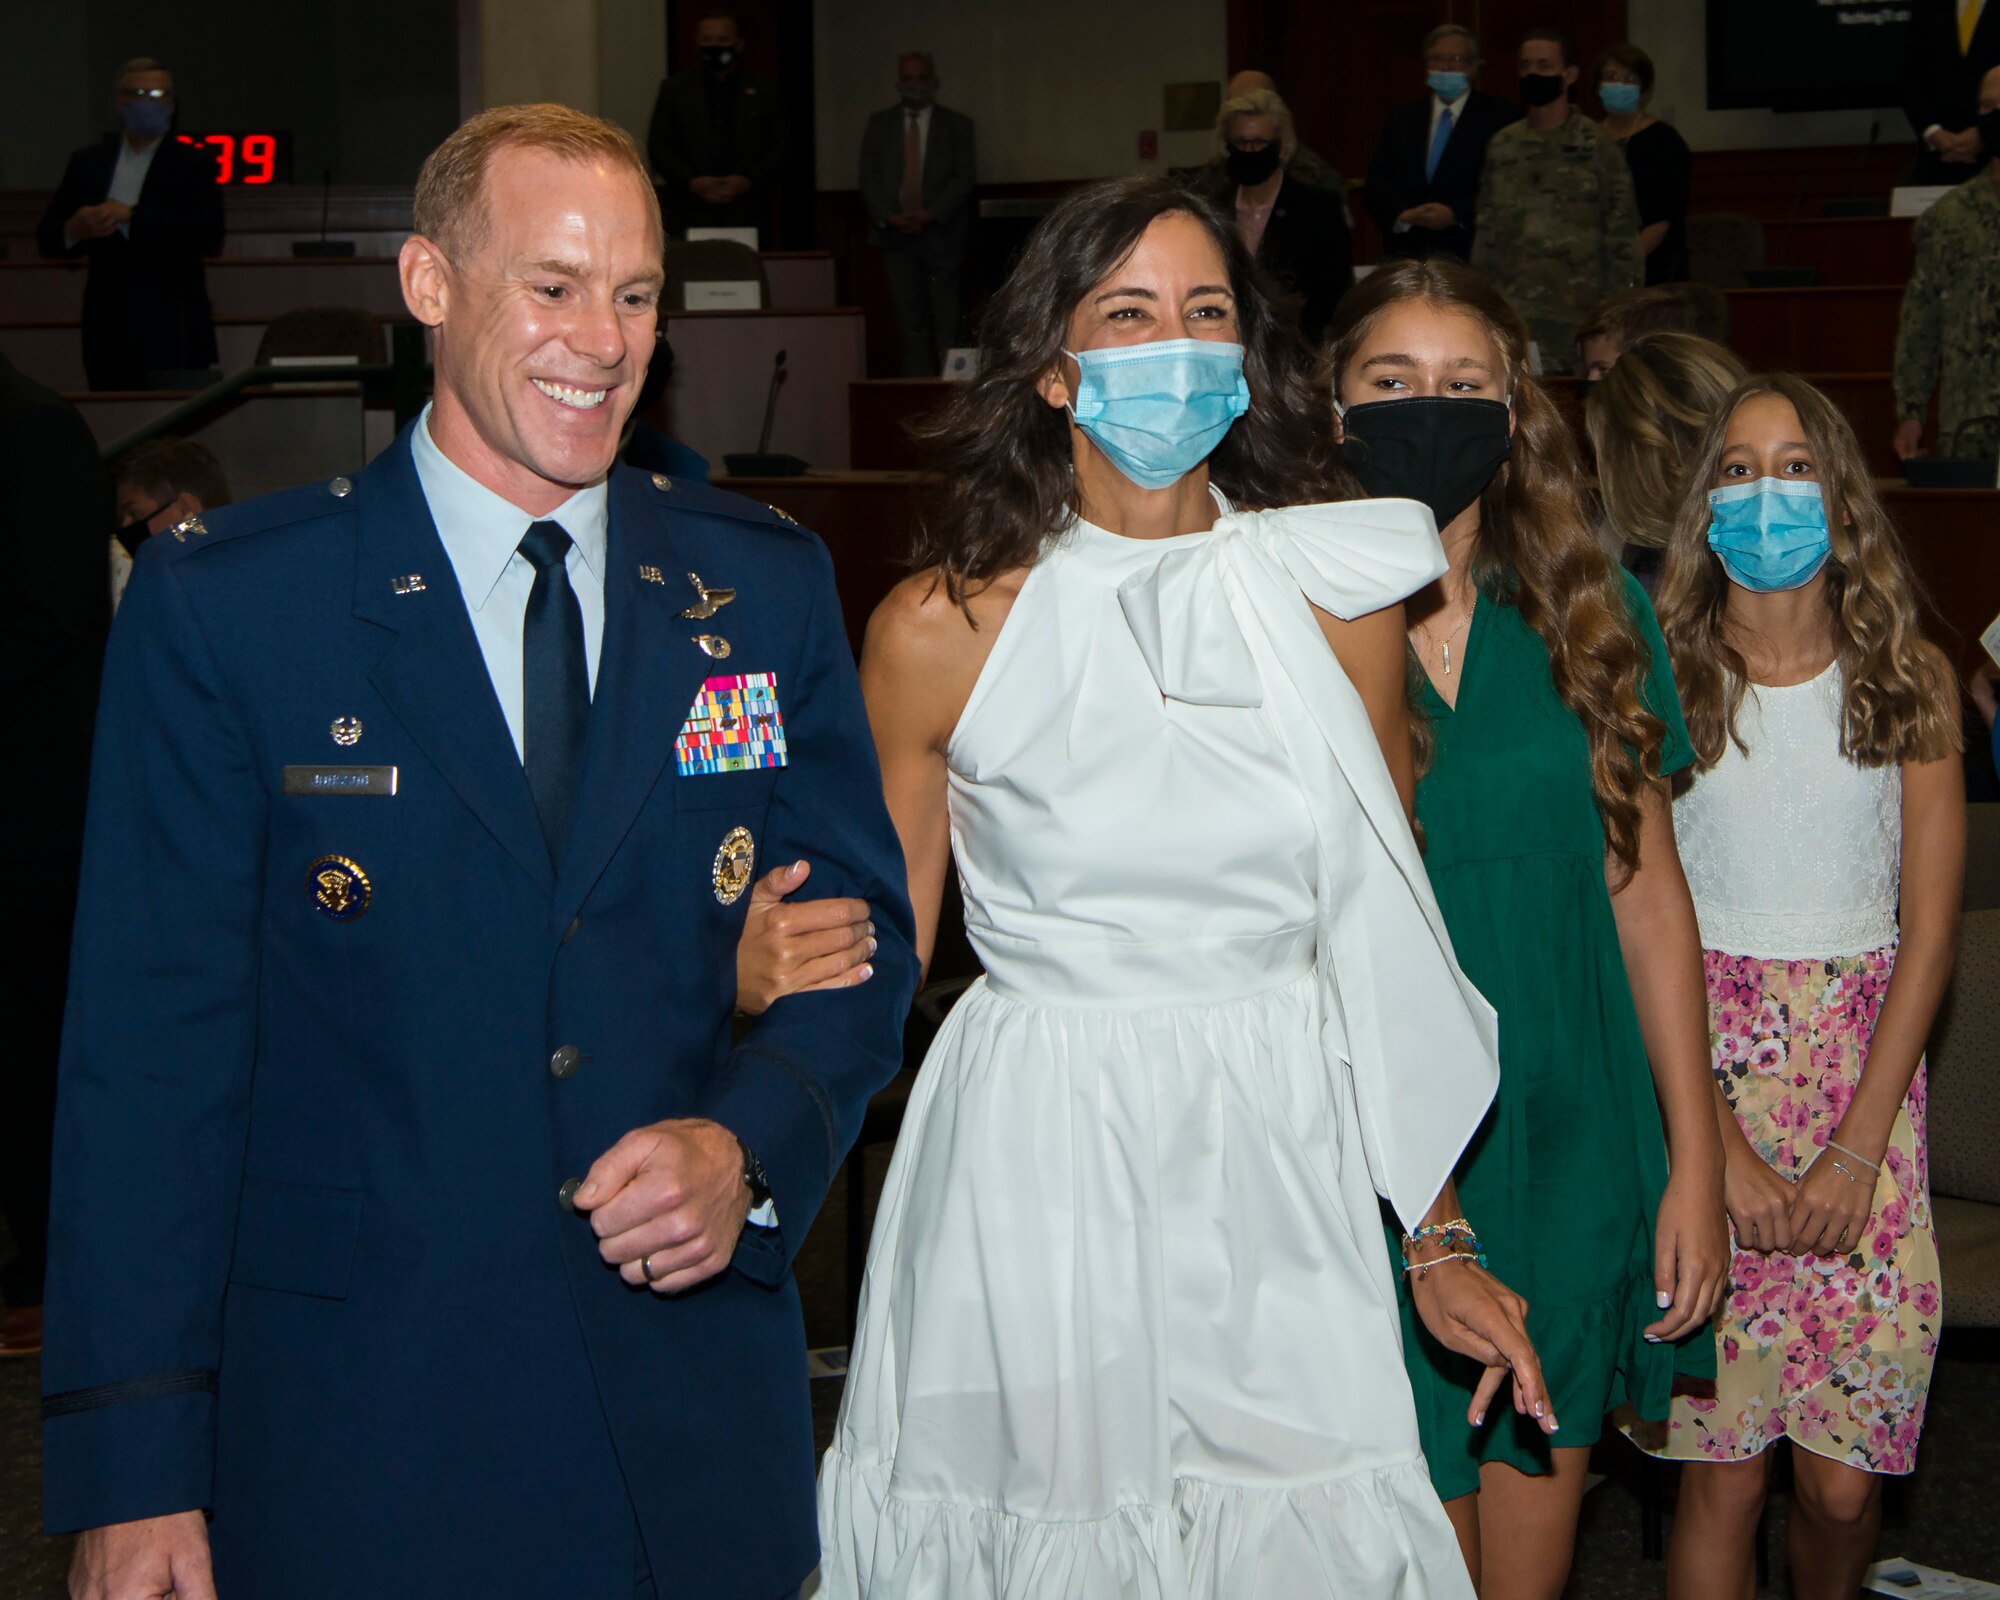 U.S. Air Force Col. Benjamin Jonsson, assuming 6th Air Refueling Wing (ARW) commander, walks with his wife Heather at the 6th ARW assumption of command ceremony at MacDill Air Force Base, Fla., Aug. 4, 2020.